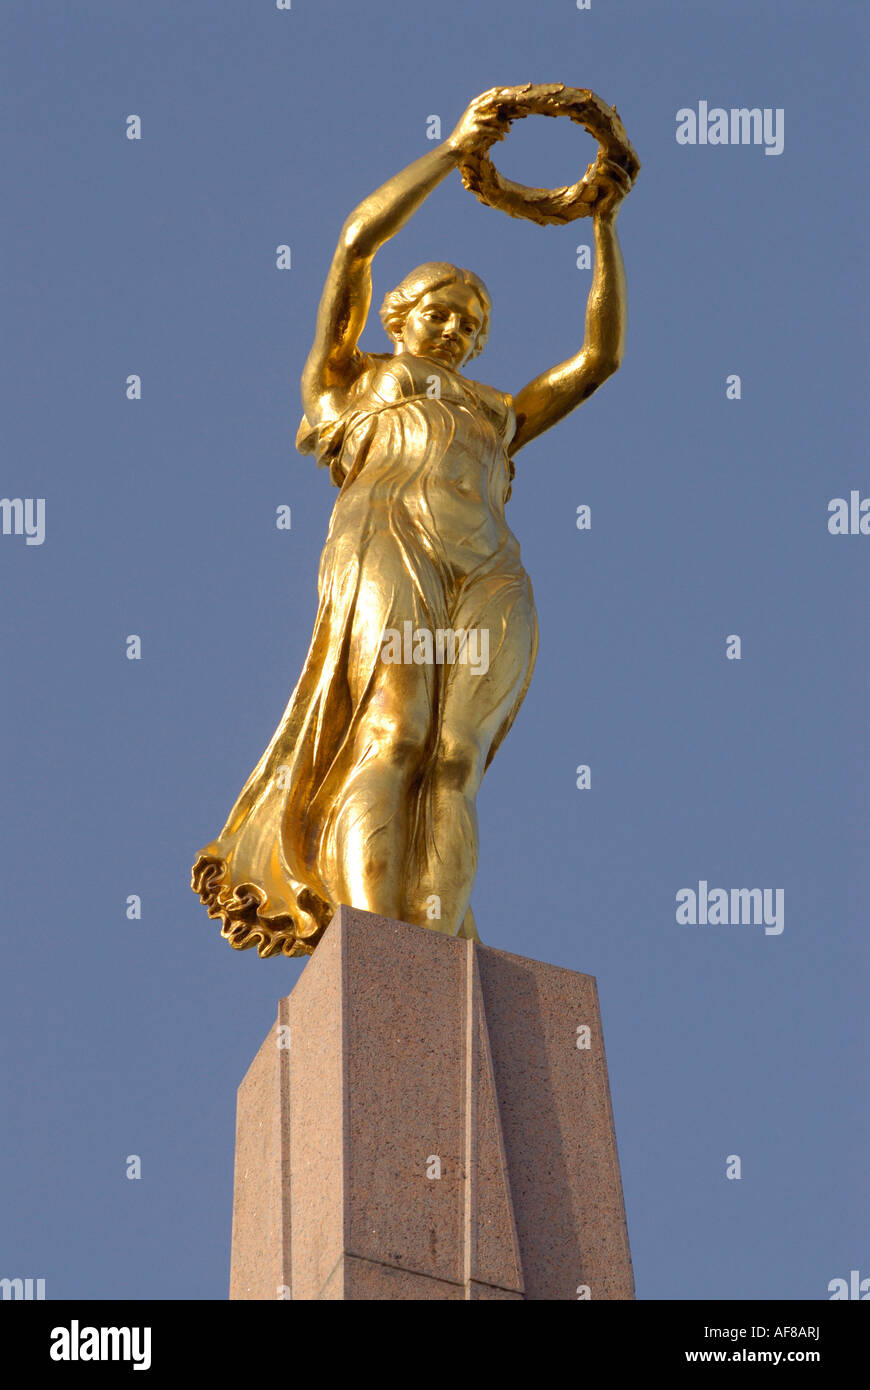 View at a golden statue, Memorial Gelle Fra, Luxembourg city, Luxembourg, Europe Stock Photo